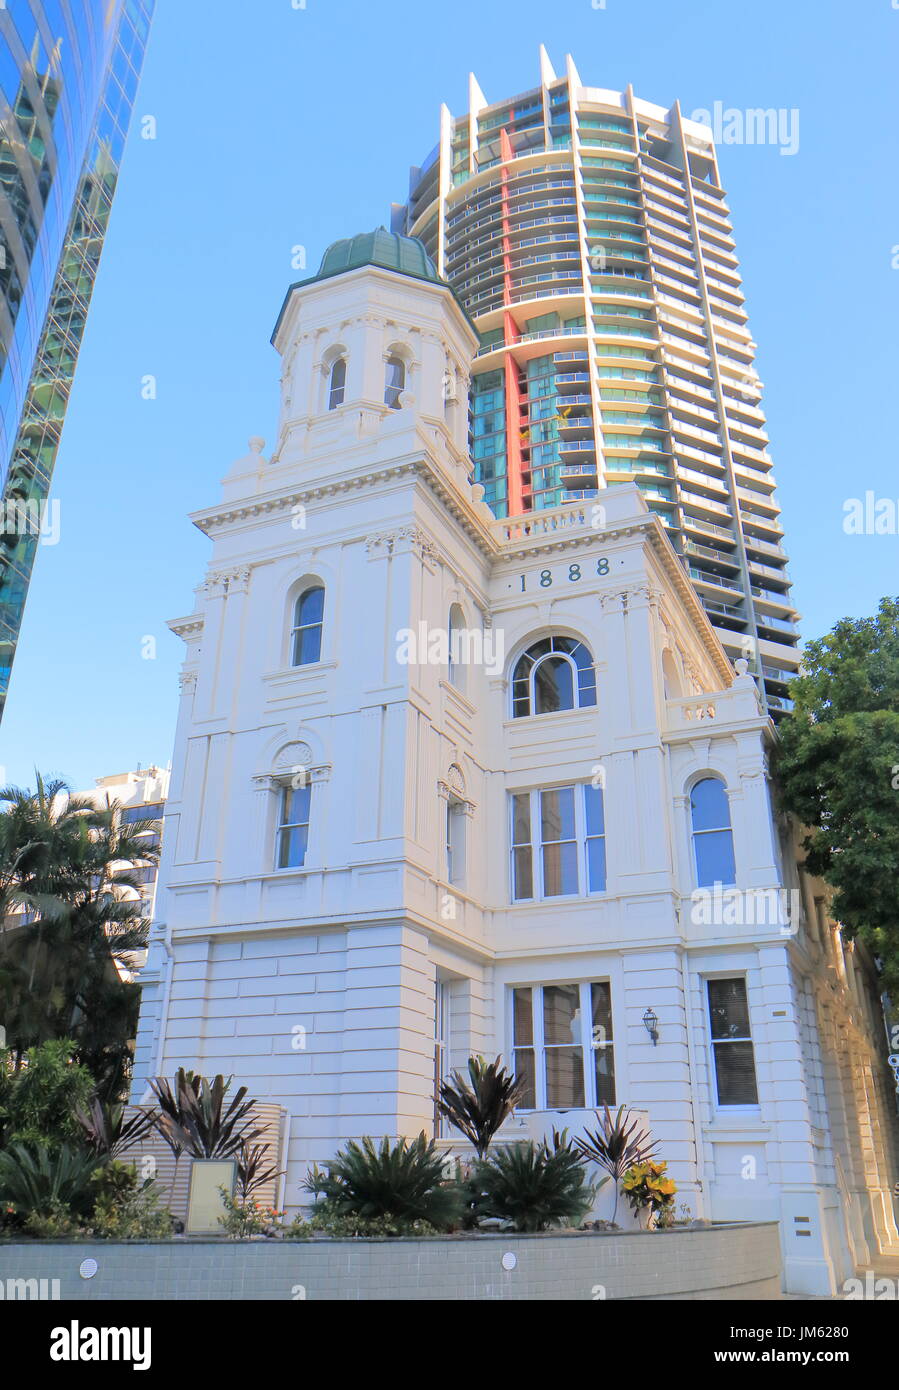 Naldham house Historical architecture Brisbane Australia. Naldham house was built from 1864 to 1889 and added to the Queensland Heritage Register. Stock Photo